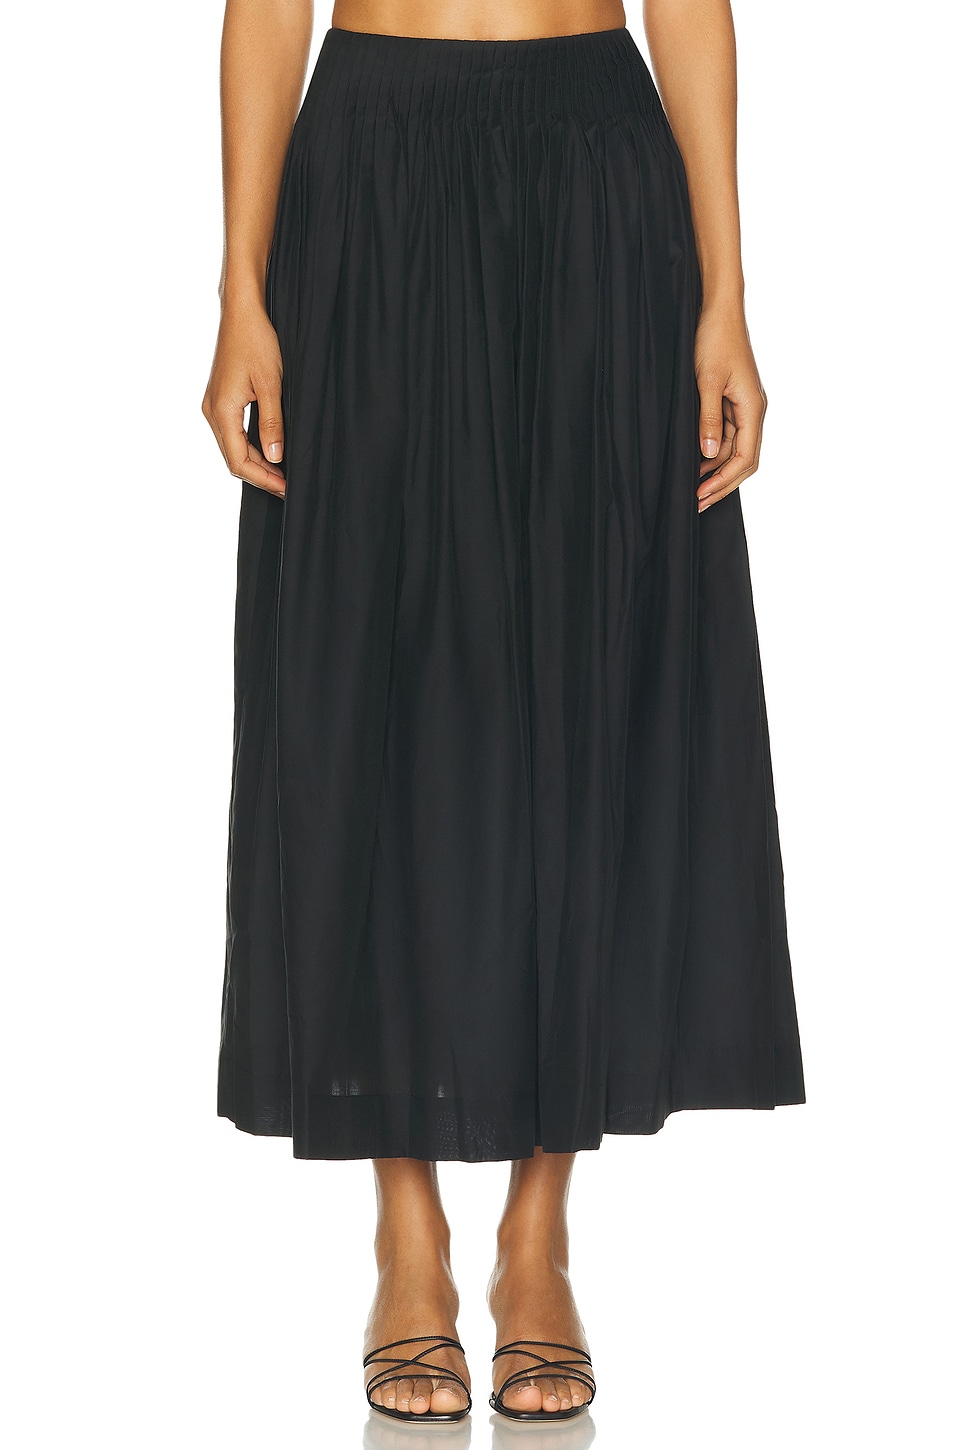 Artemis Long Skirt With Gathers in Black